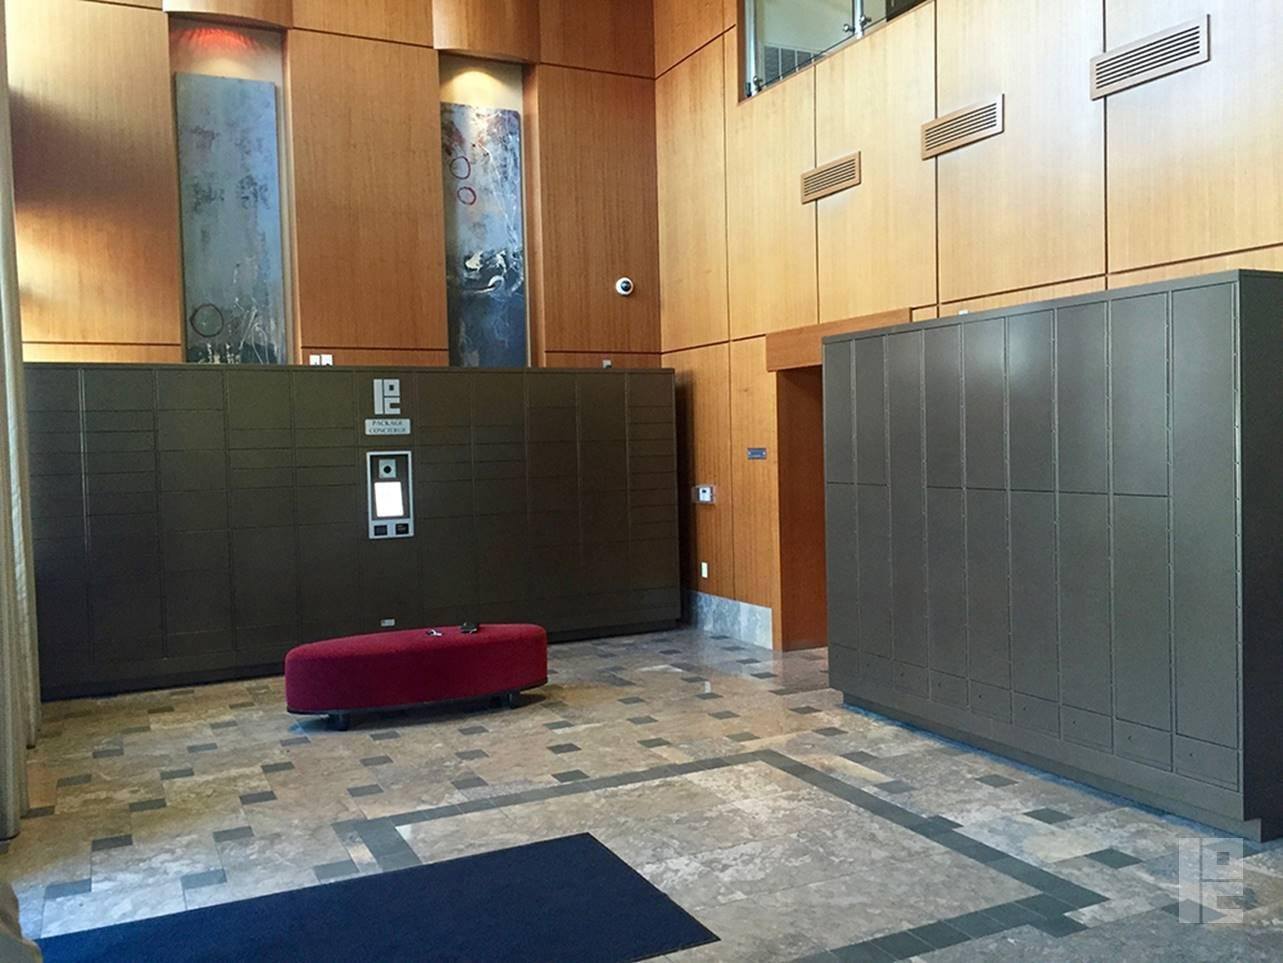 lobby with package lockers and dry cleaning lockers